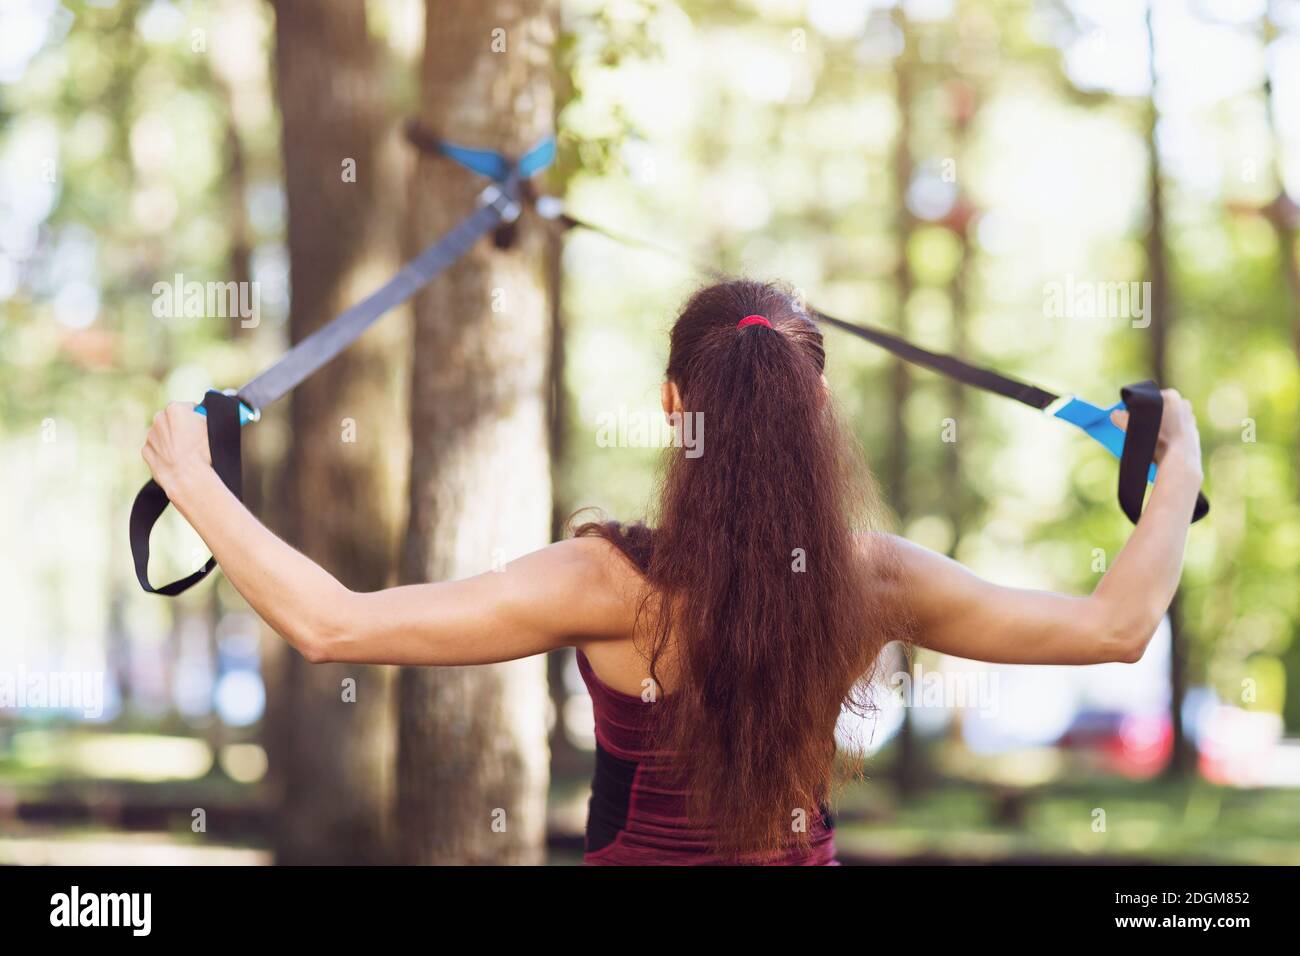 A young woman performs an exercise to work out the muscles of the back on an overhead machine attached to a tree in the park. Stock Photo